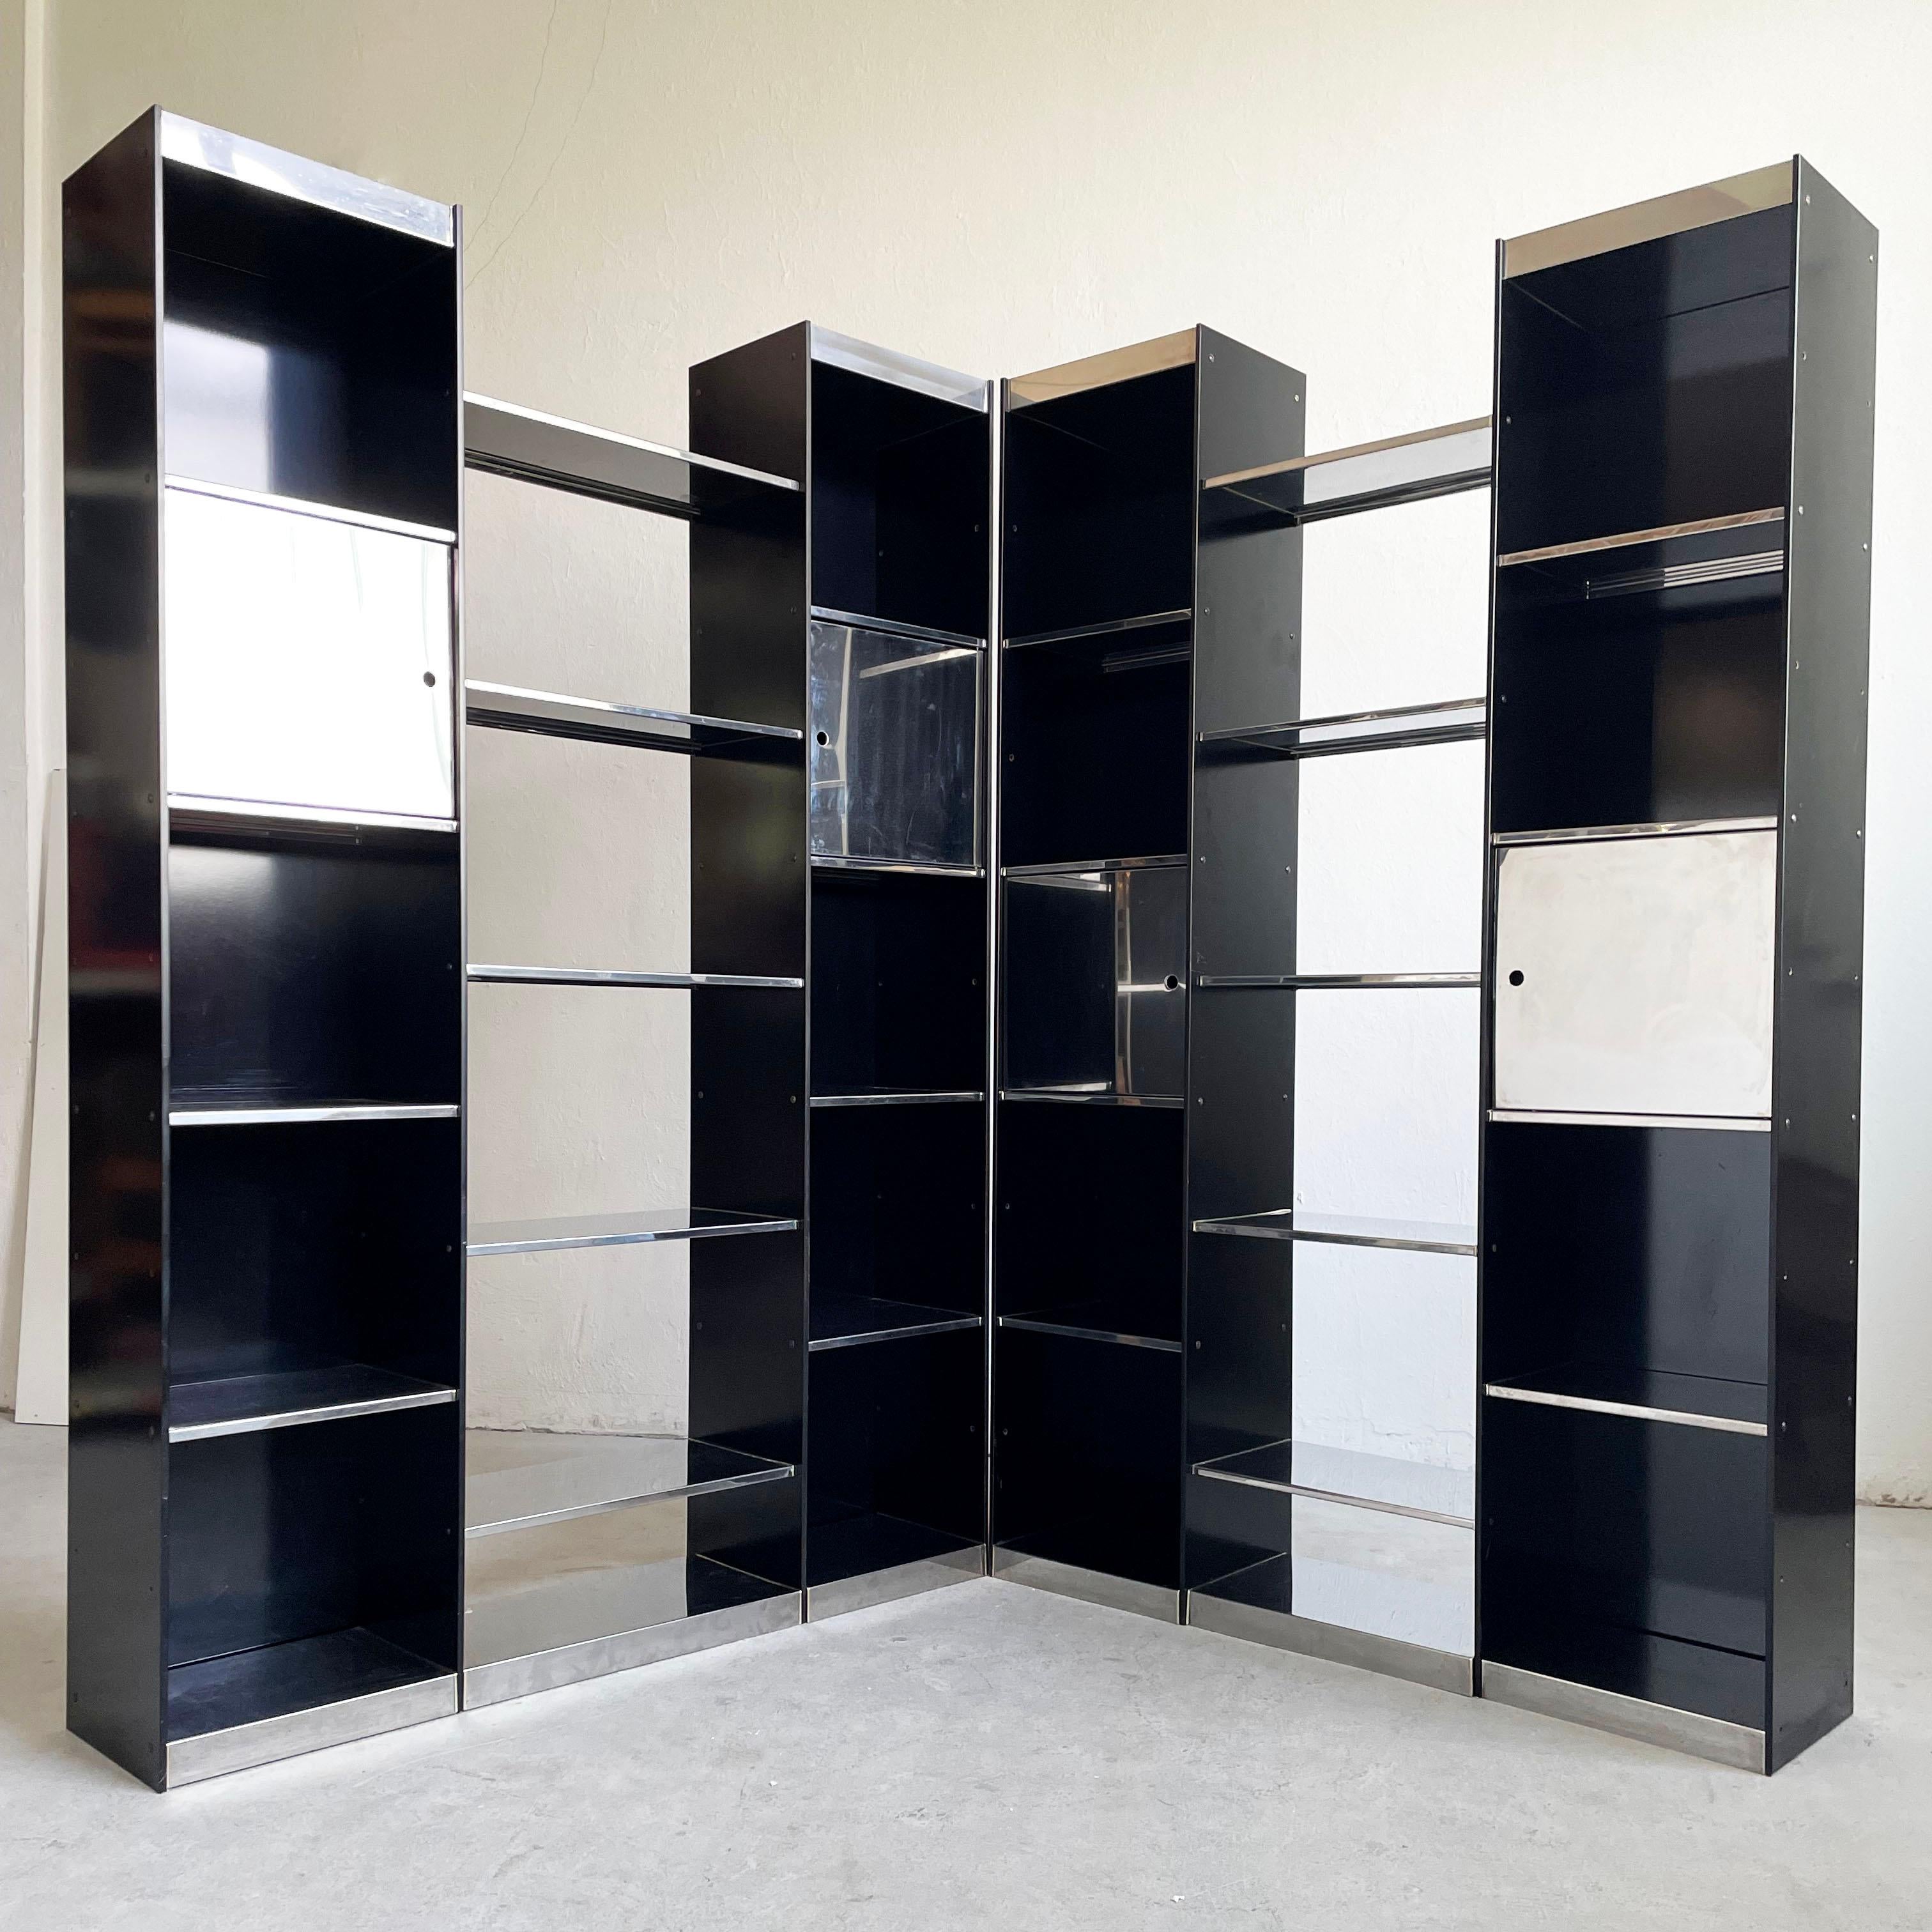 Very Rare Italian Modern Library Bookcase by Willy Rizzo for Cidue, Italy, 1970 For Sale 3